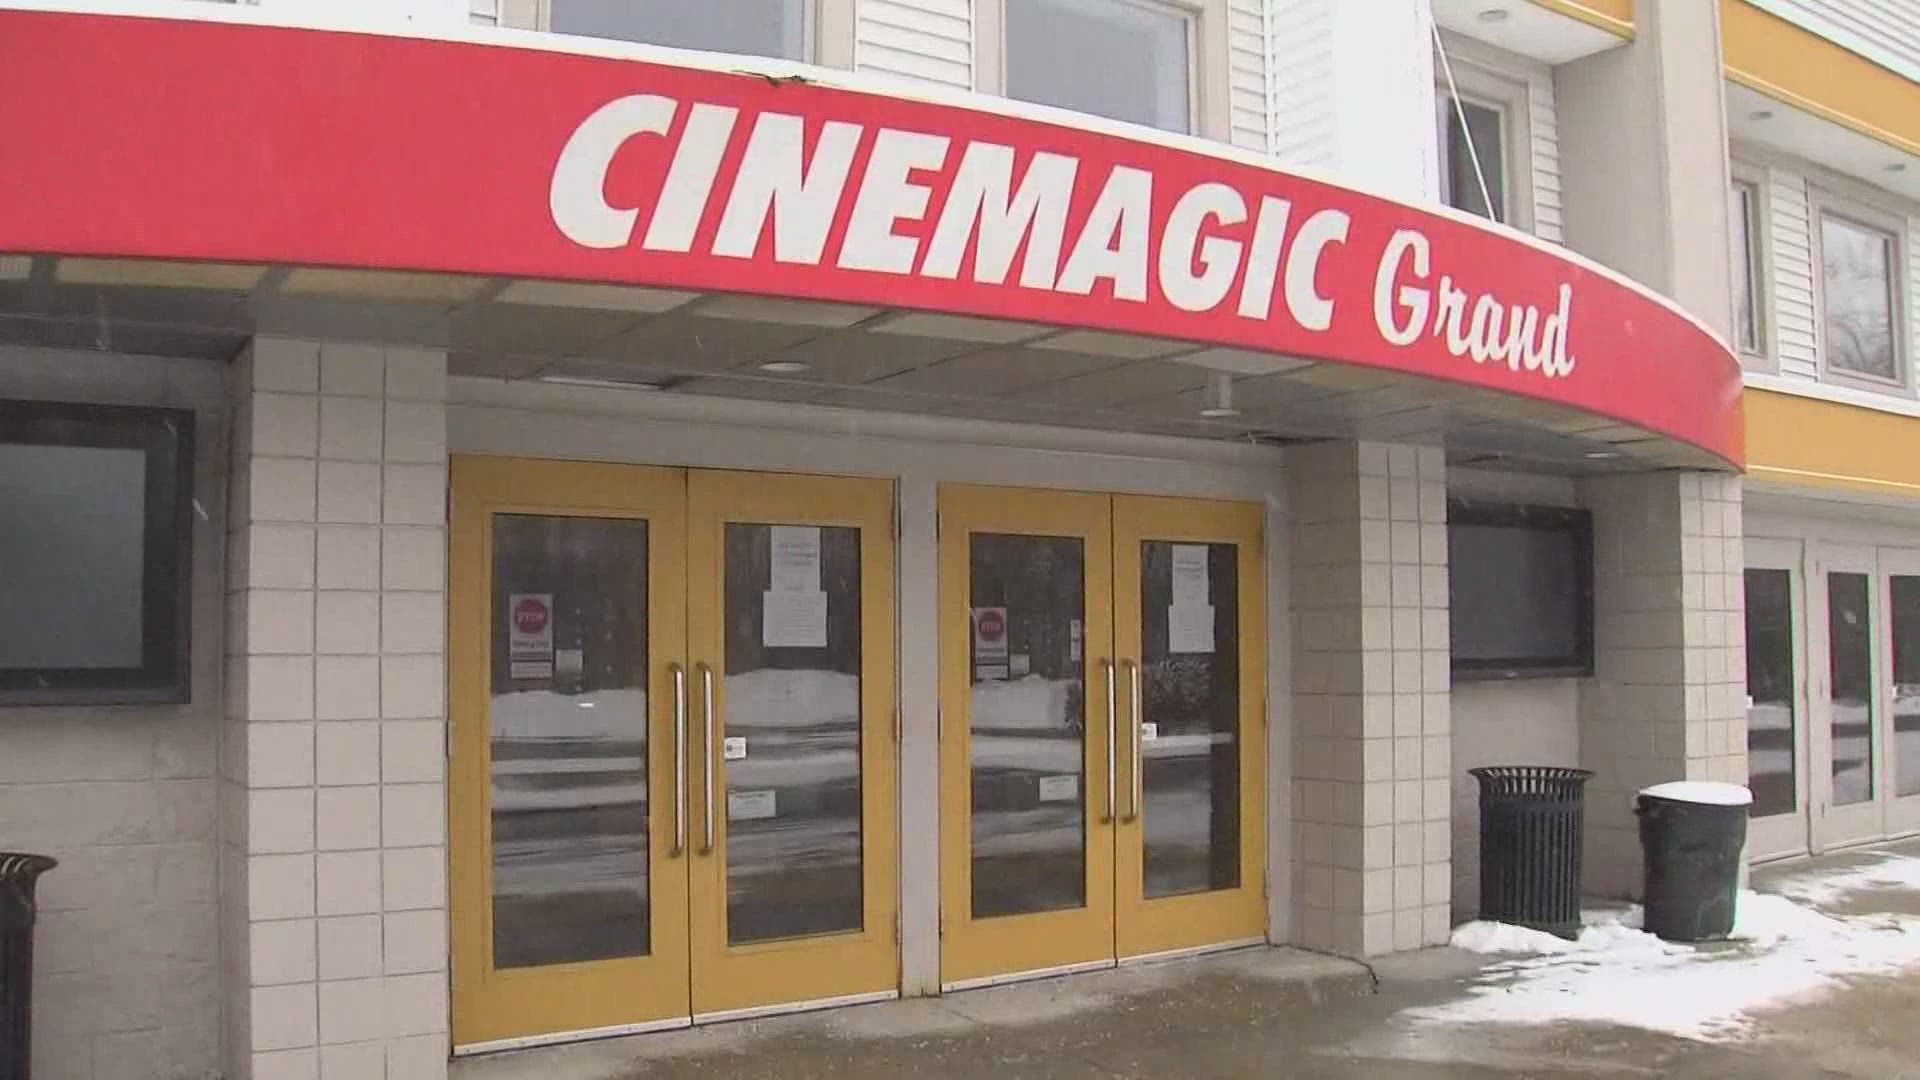 Several sources tell NEWS CENTER Maine that the pandemic had a financial impact on Cinemagic. After a temporary closure a few weeks ago, they have no plan to reopen.